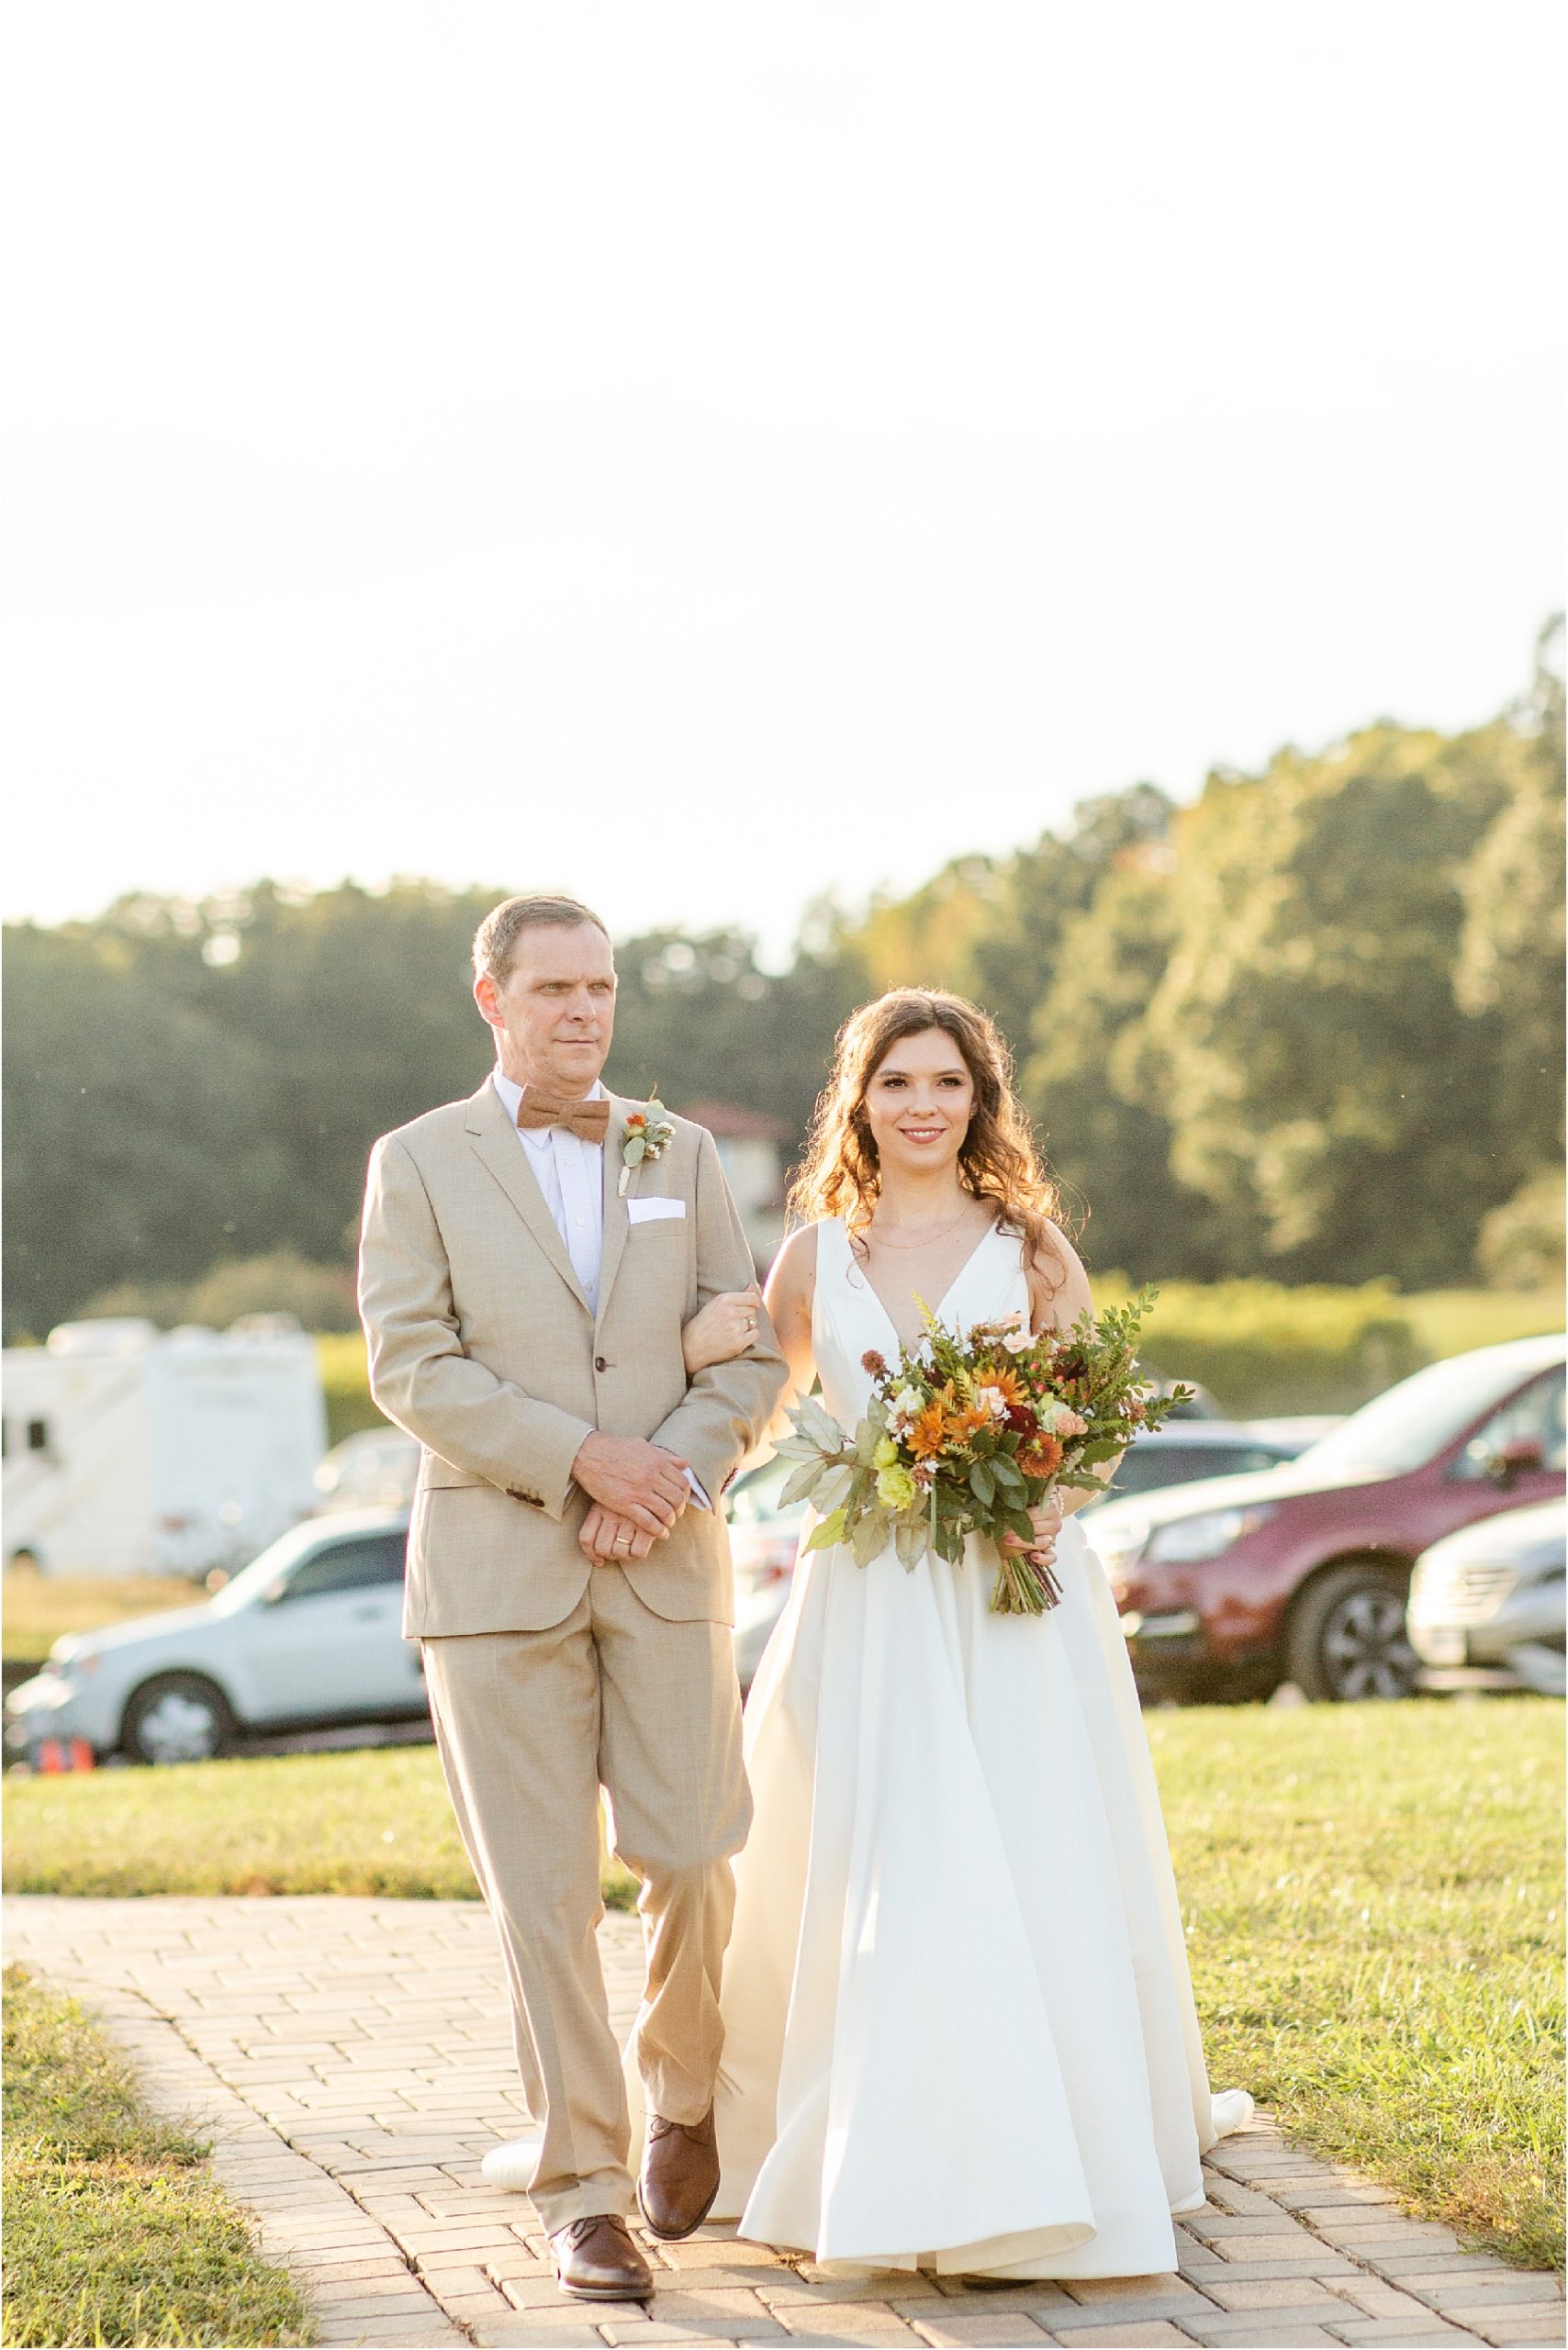 Man in tan suit walks with daughter in wedding dress holding flowers